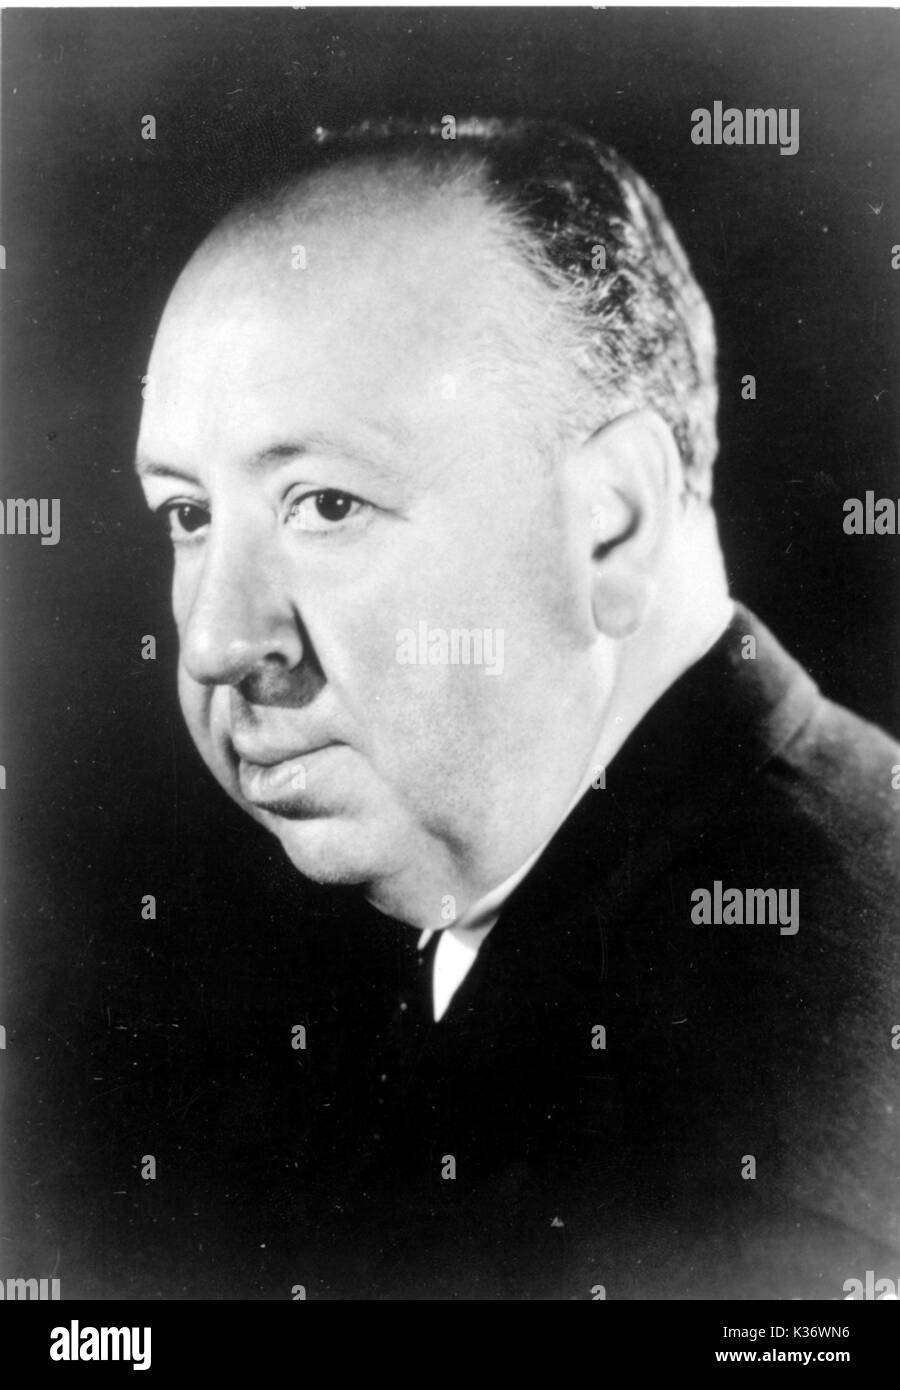 ALFRED HITCHCOCK Stock Photo